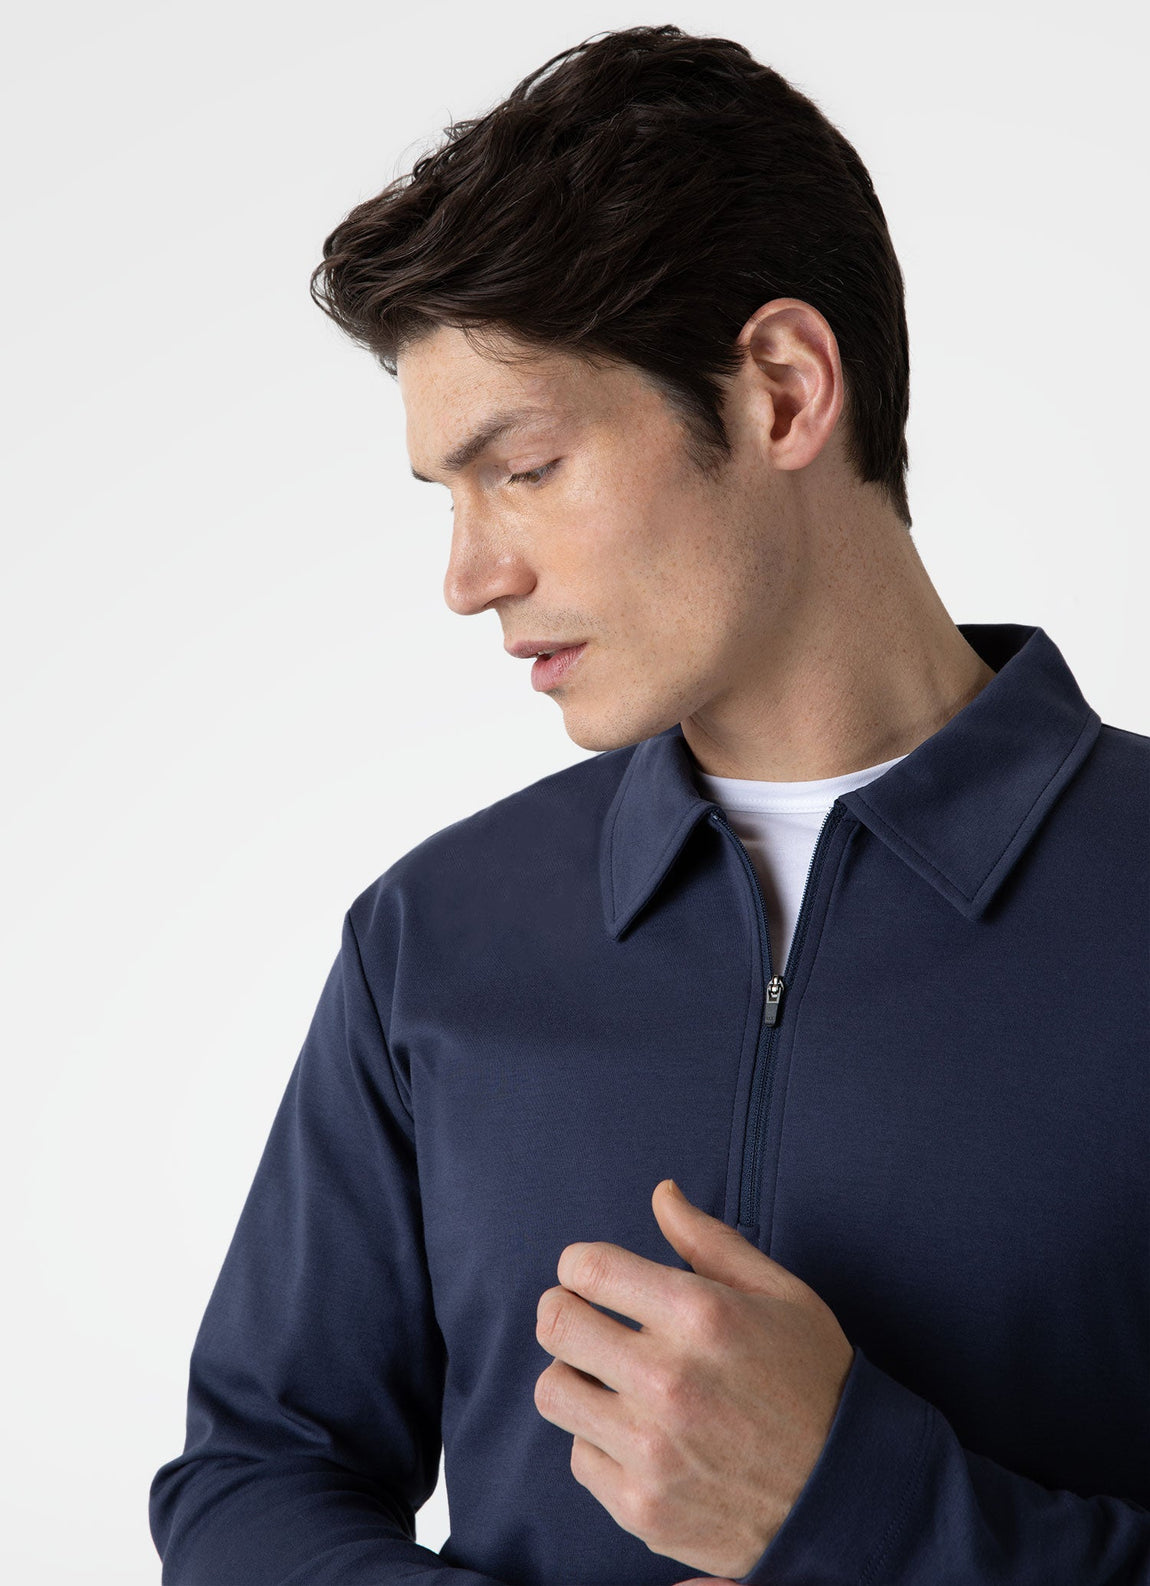 Men's Brushed Cotton Long Sleeve Polo Shirt in Navy